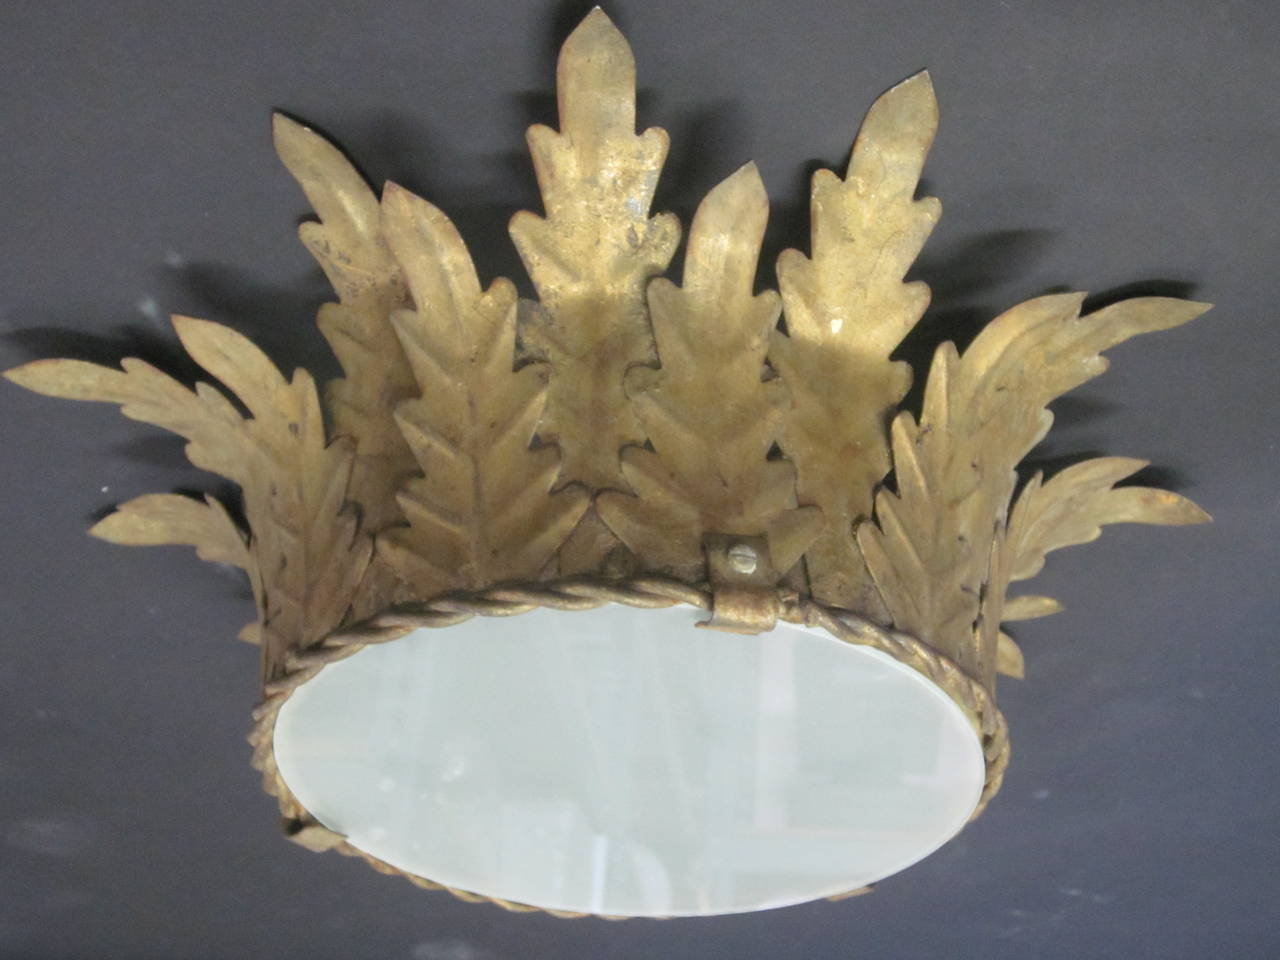 A French 1940 Gilt Iron Flush Mount Fixture in the Modern Neoclassical Spirit with a Sunburst / Starburst Form. This piece can also suspend as a pendant with addition of a stem.